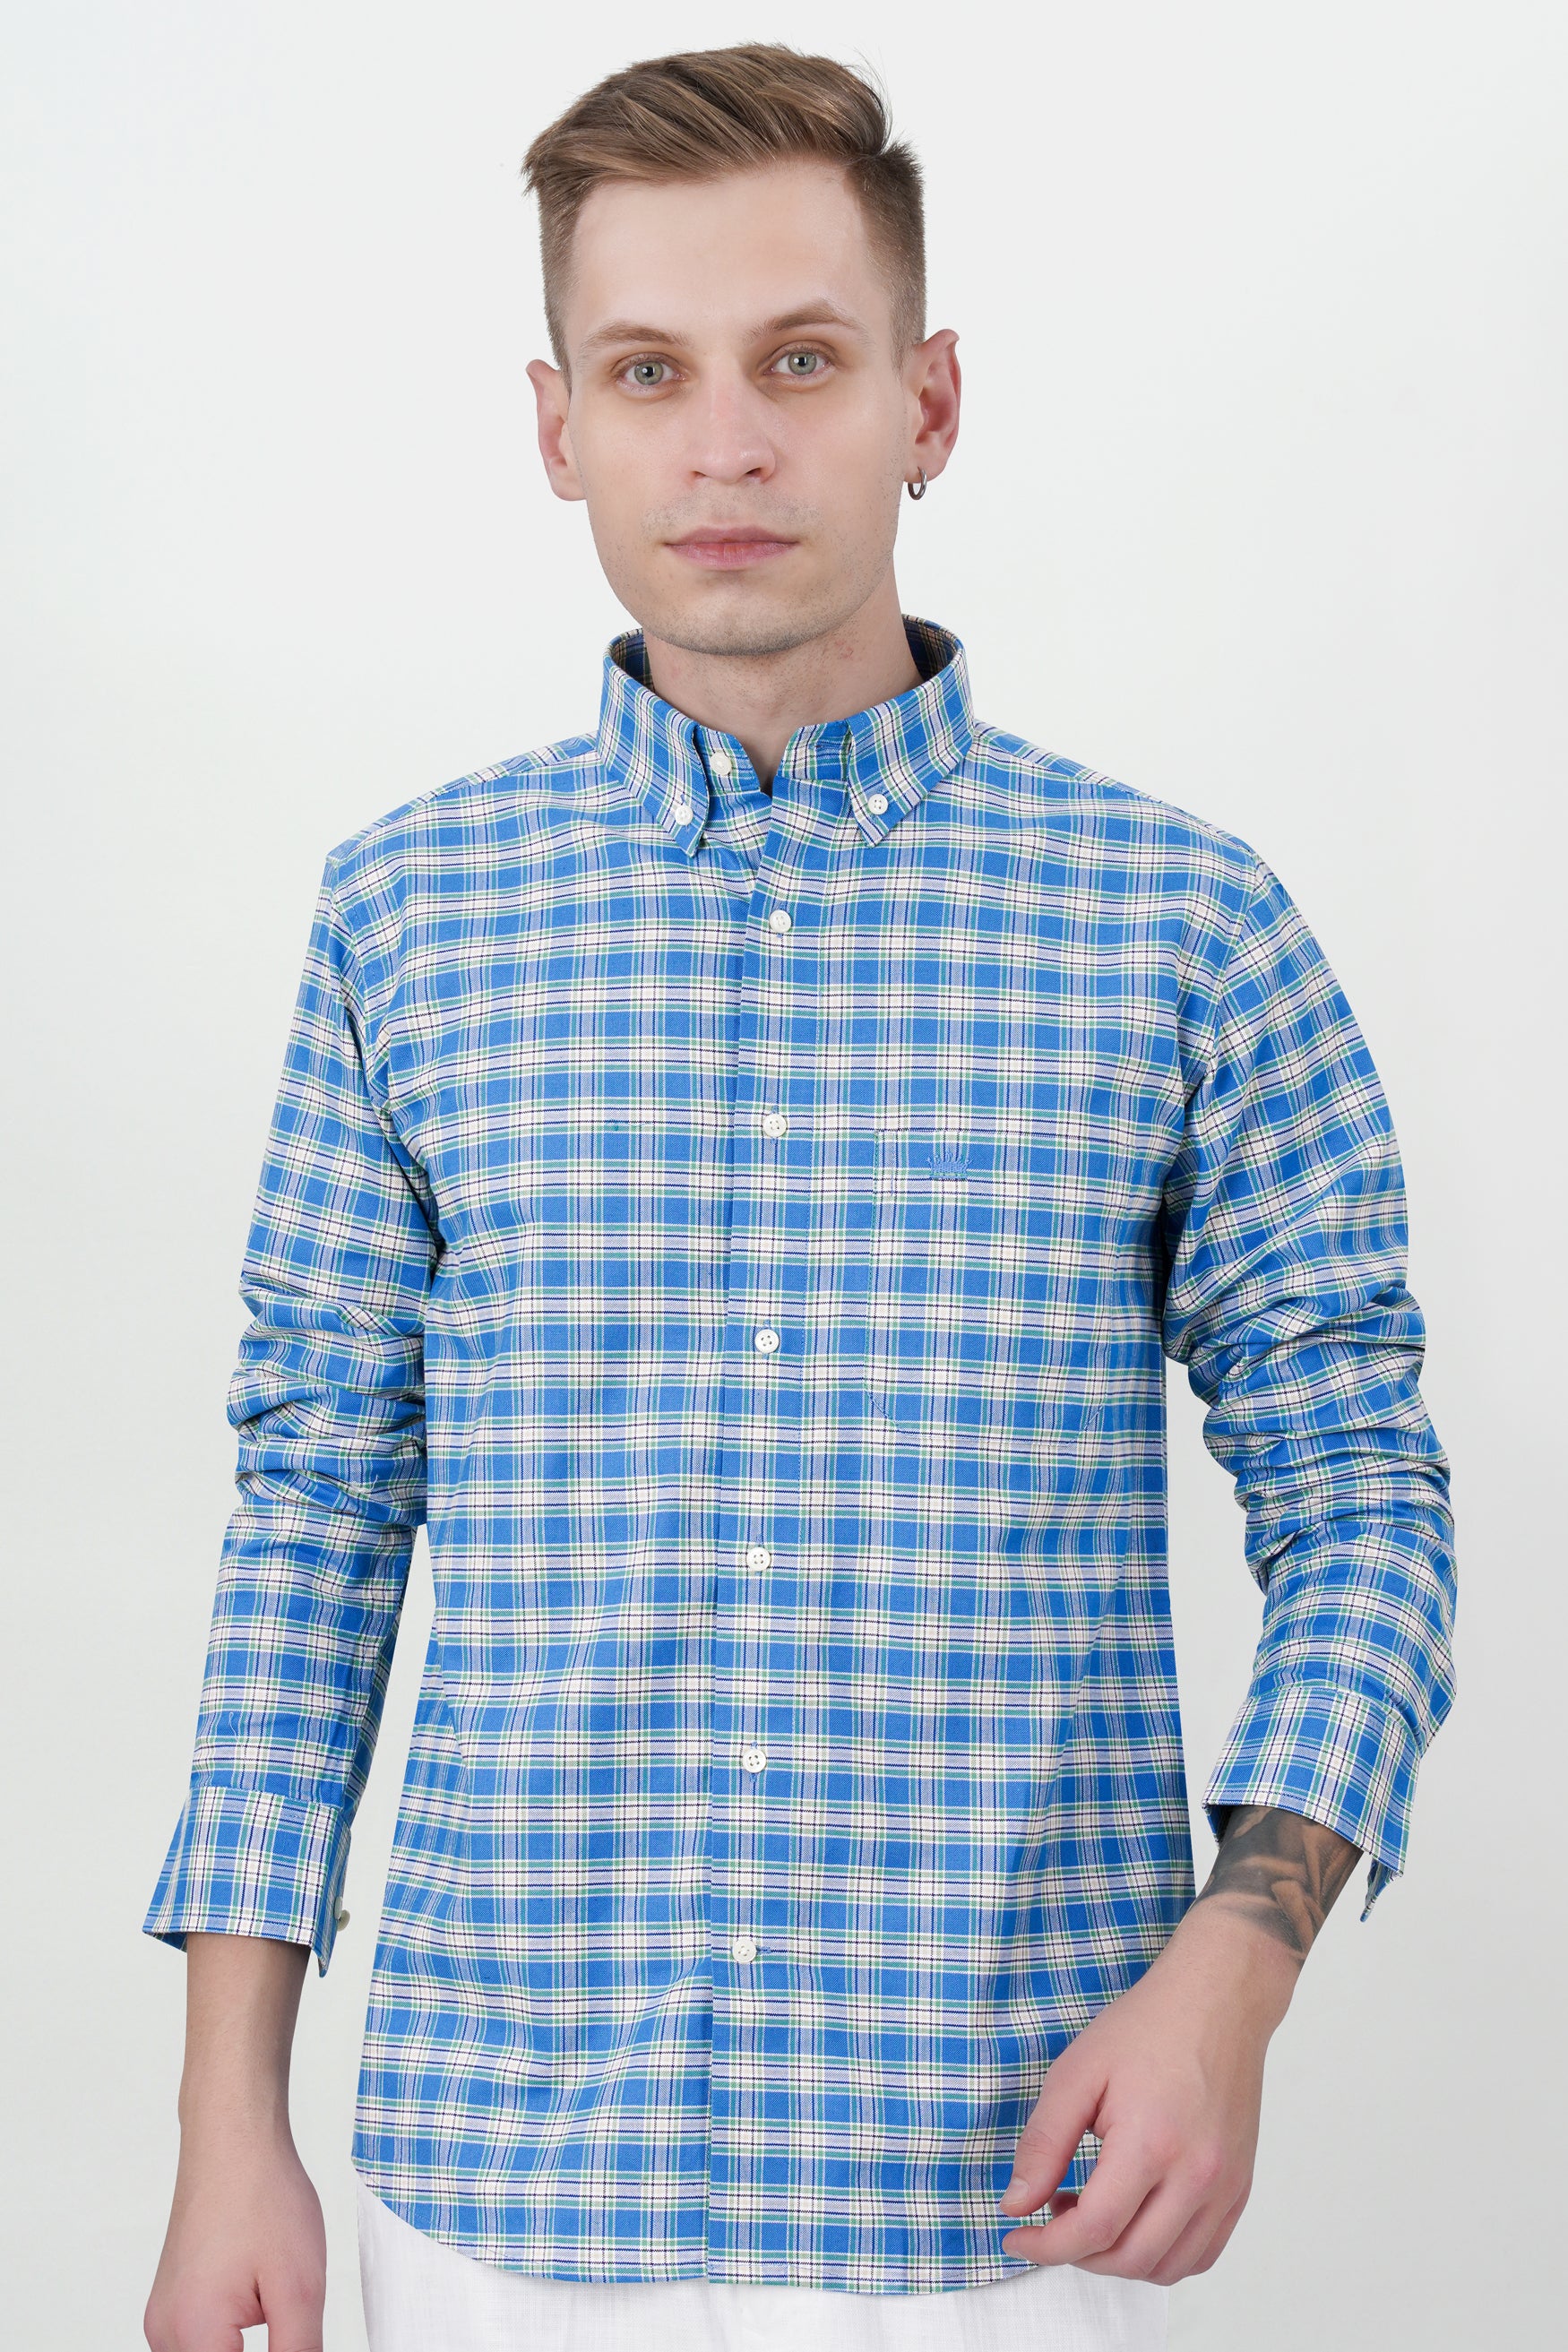 Mariner Blue and White Checkered Royal Oxford Shirt 11693-BD-38, 11693-BD-H-38, 11693-BD-39, 11693-BD-H-39, 11693-BD-40, 11693-BD-H-40, 11693-BD-42, 11693-BD-H-42, 11693-BD-44, 11693-BD-H-44, 11693-BD-46, 11693-BD-H-46, 11693-BD-48, 11693-BD-H-48, 11693-BD-50, 11693-BD-H-50, 11693-BD-52, 11693-BD-H-52